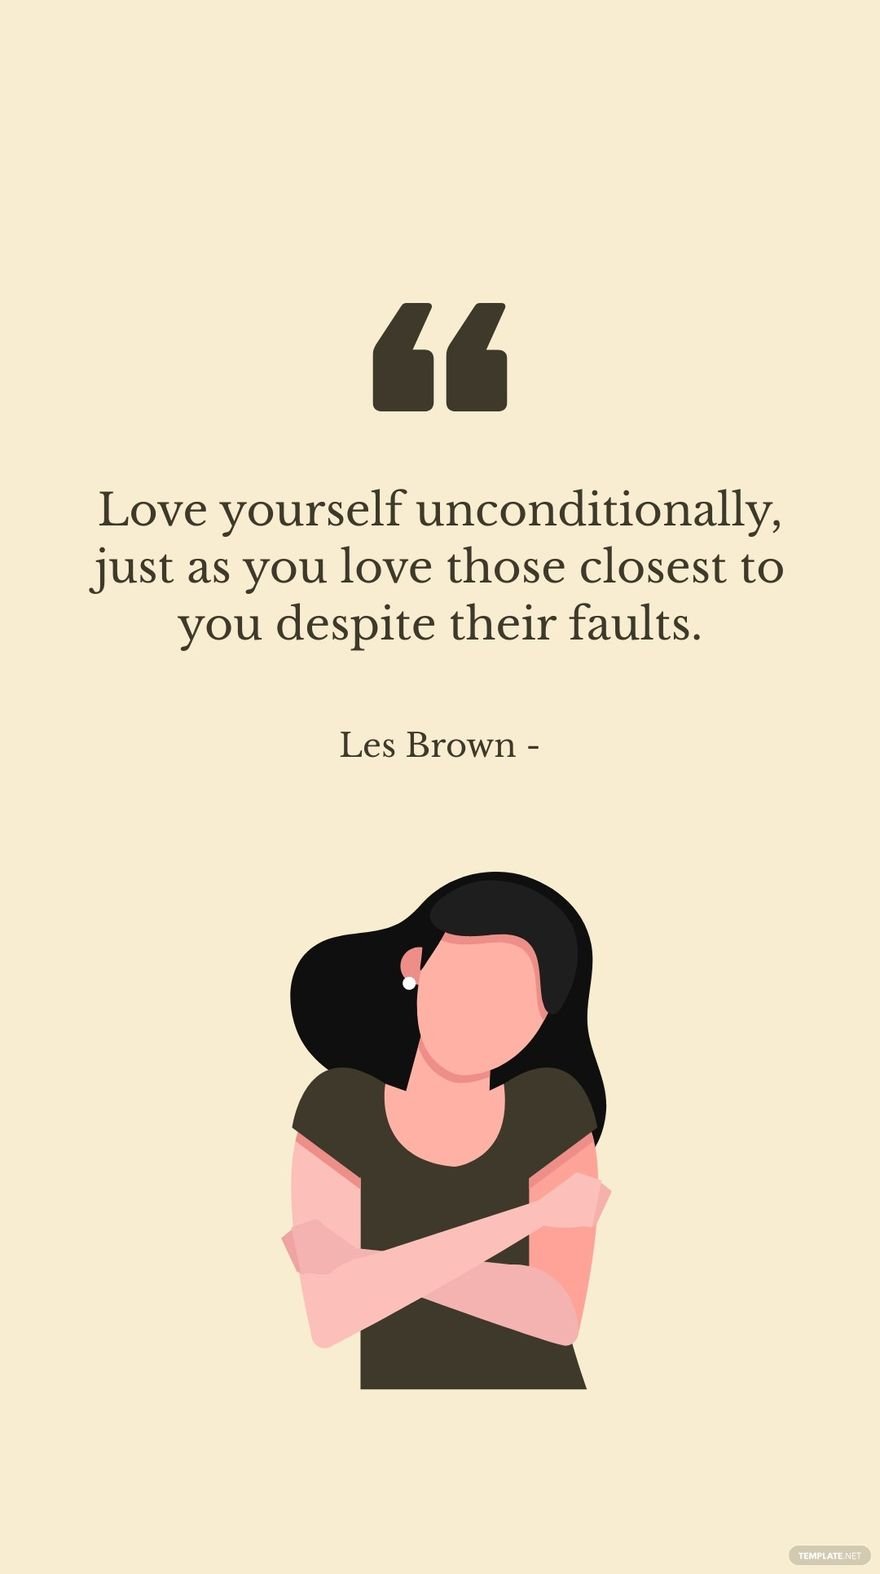 Les Brown - Love yourself unconditionally, just as you love those closest to you despite their faults.